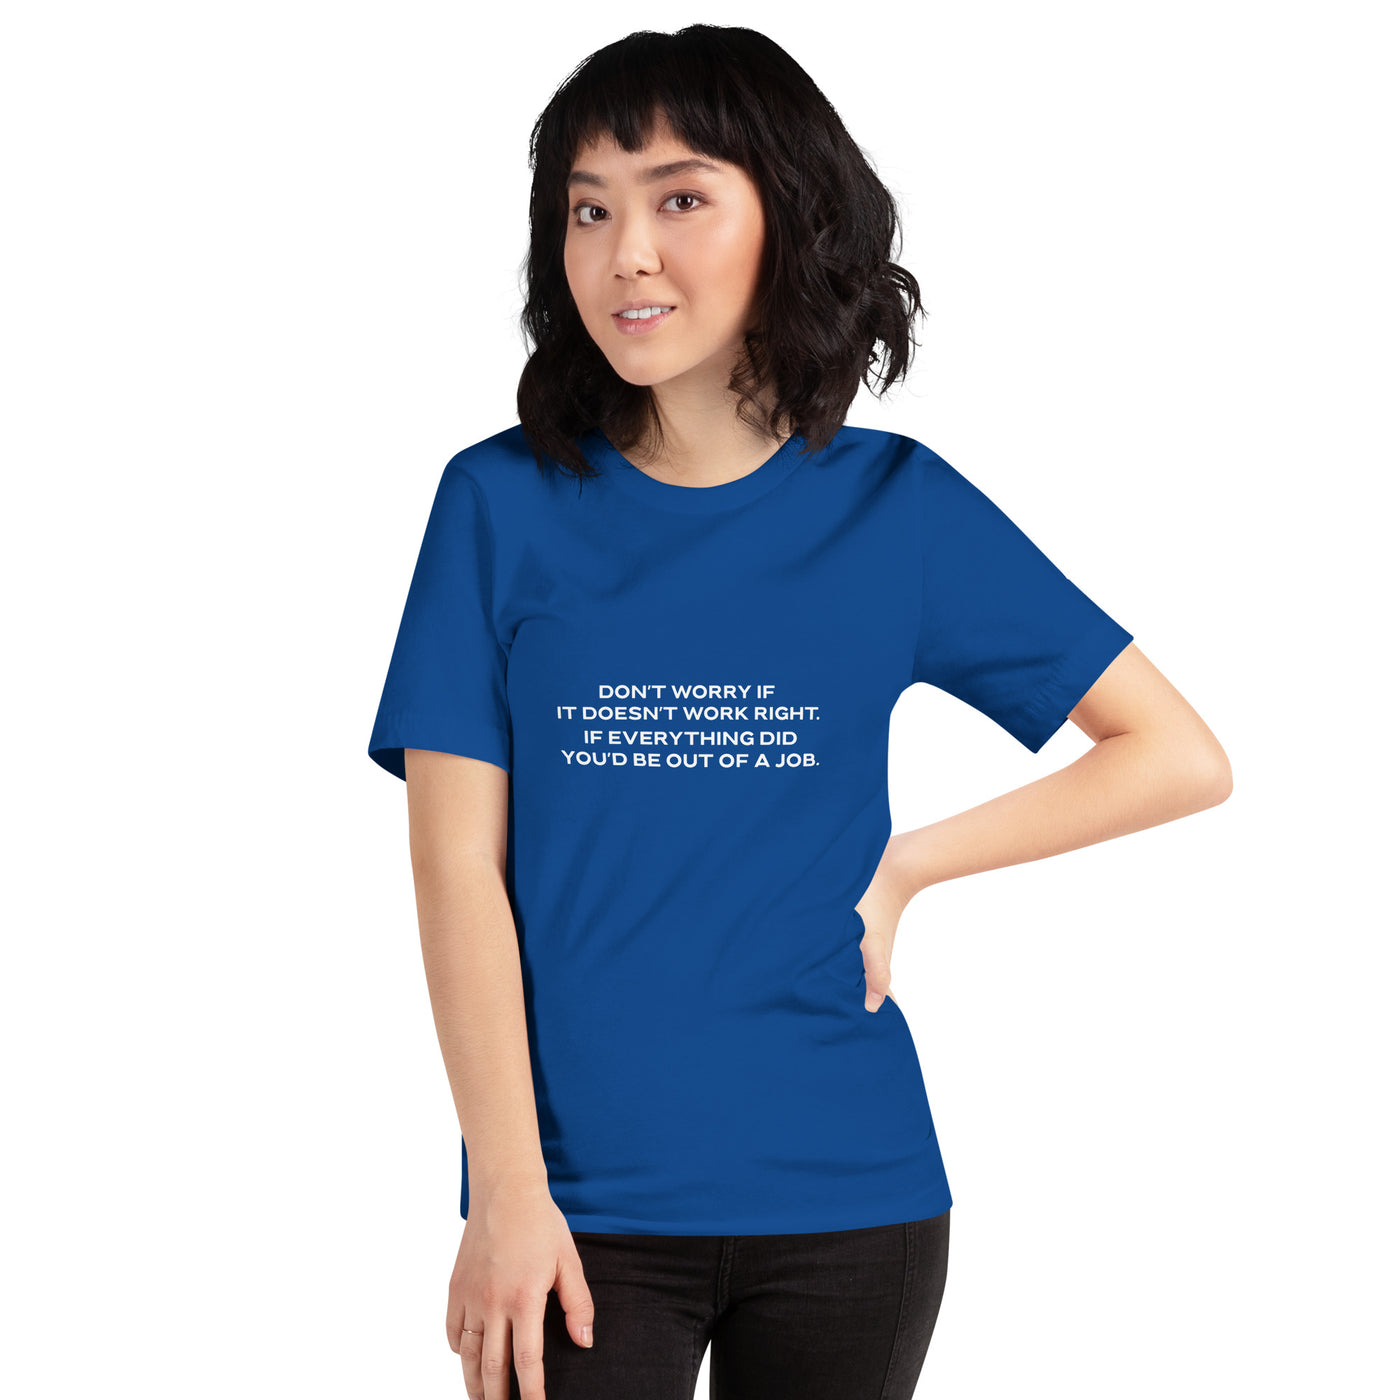 Don't worry if it doesn't work right: if everything did, you would be out of your job - Unisex t-shirt